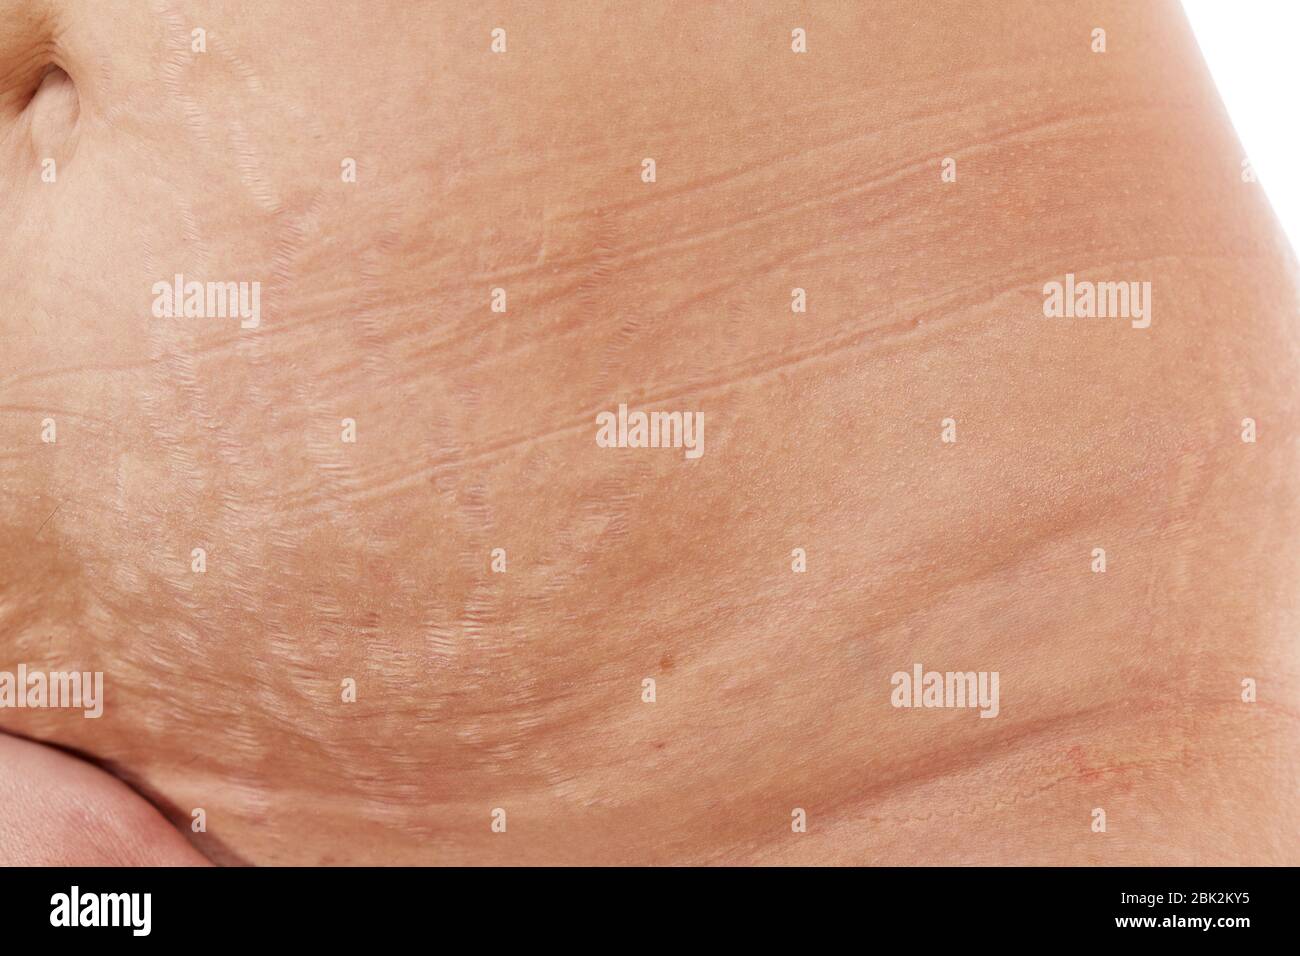 belly of a 40 year old woman with postpartum stretch marks close up Stock Photo